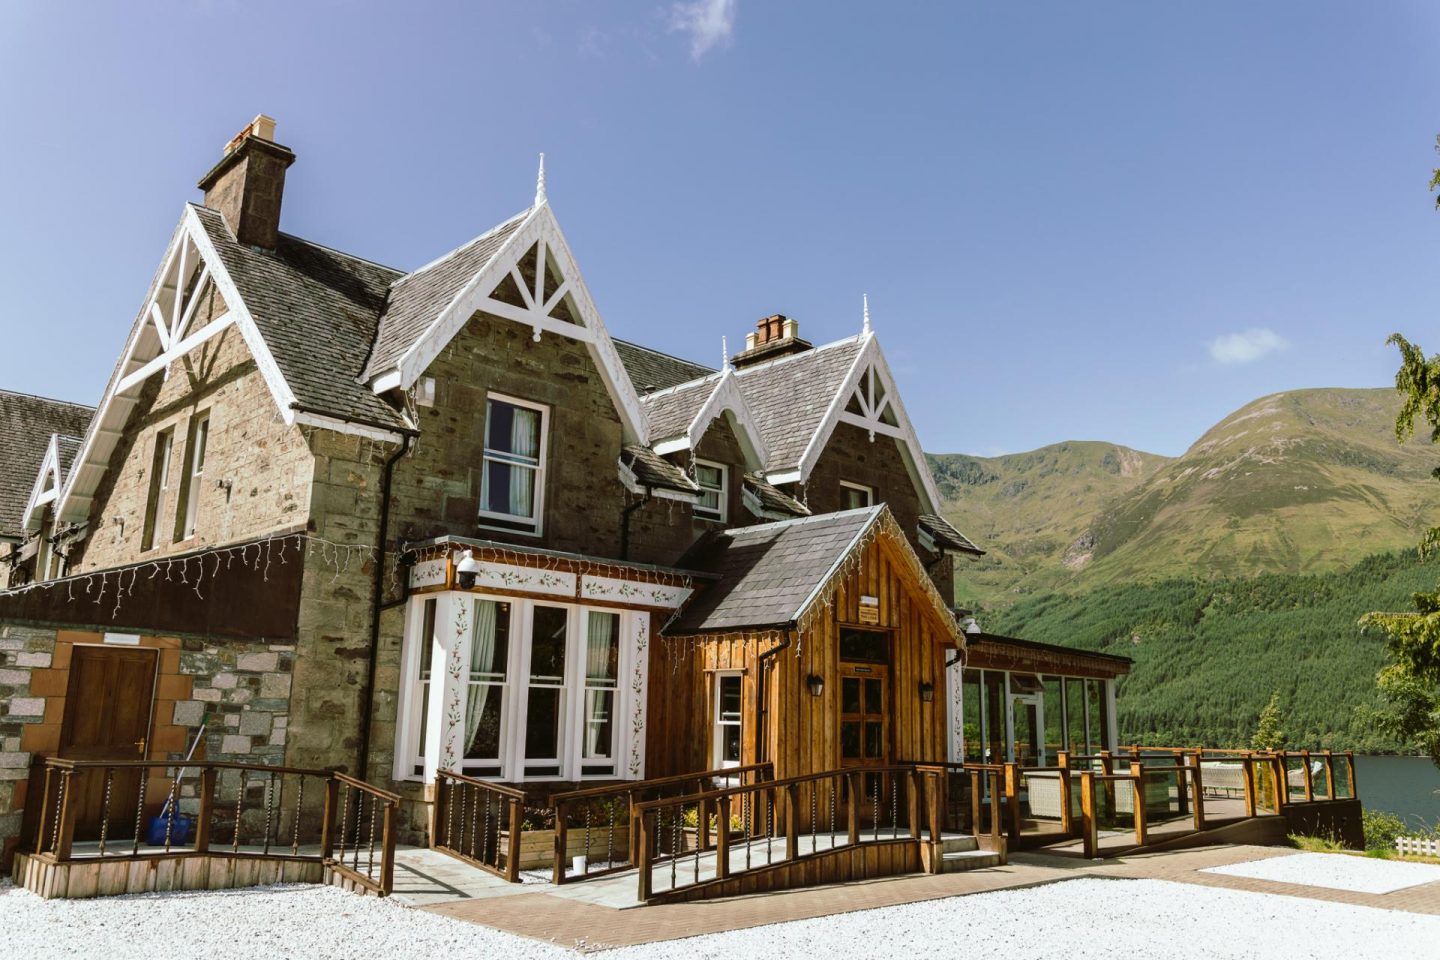 Exploring the Scottish Highlands with Black Sheep Hotels